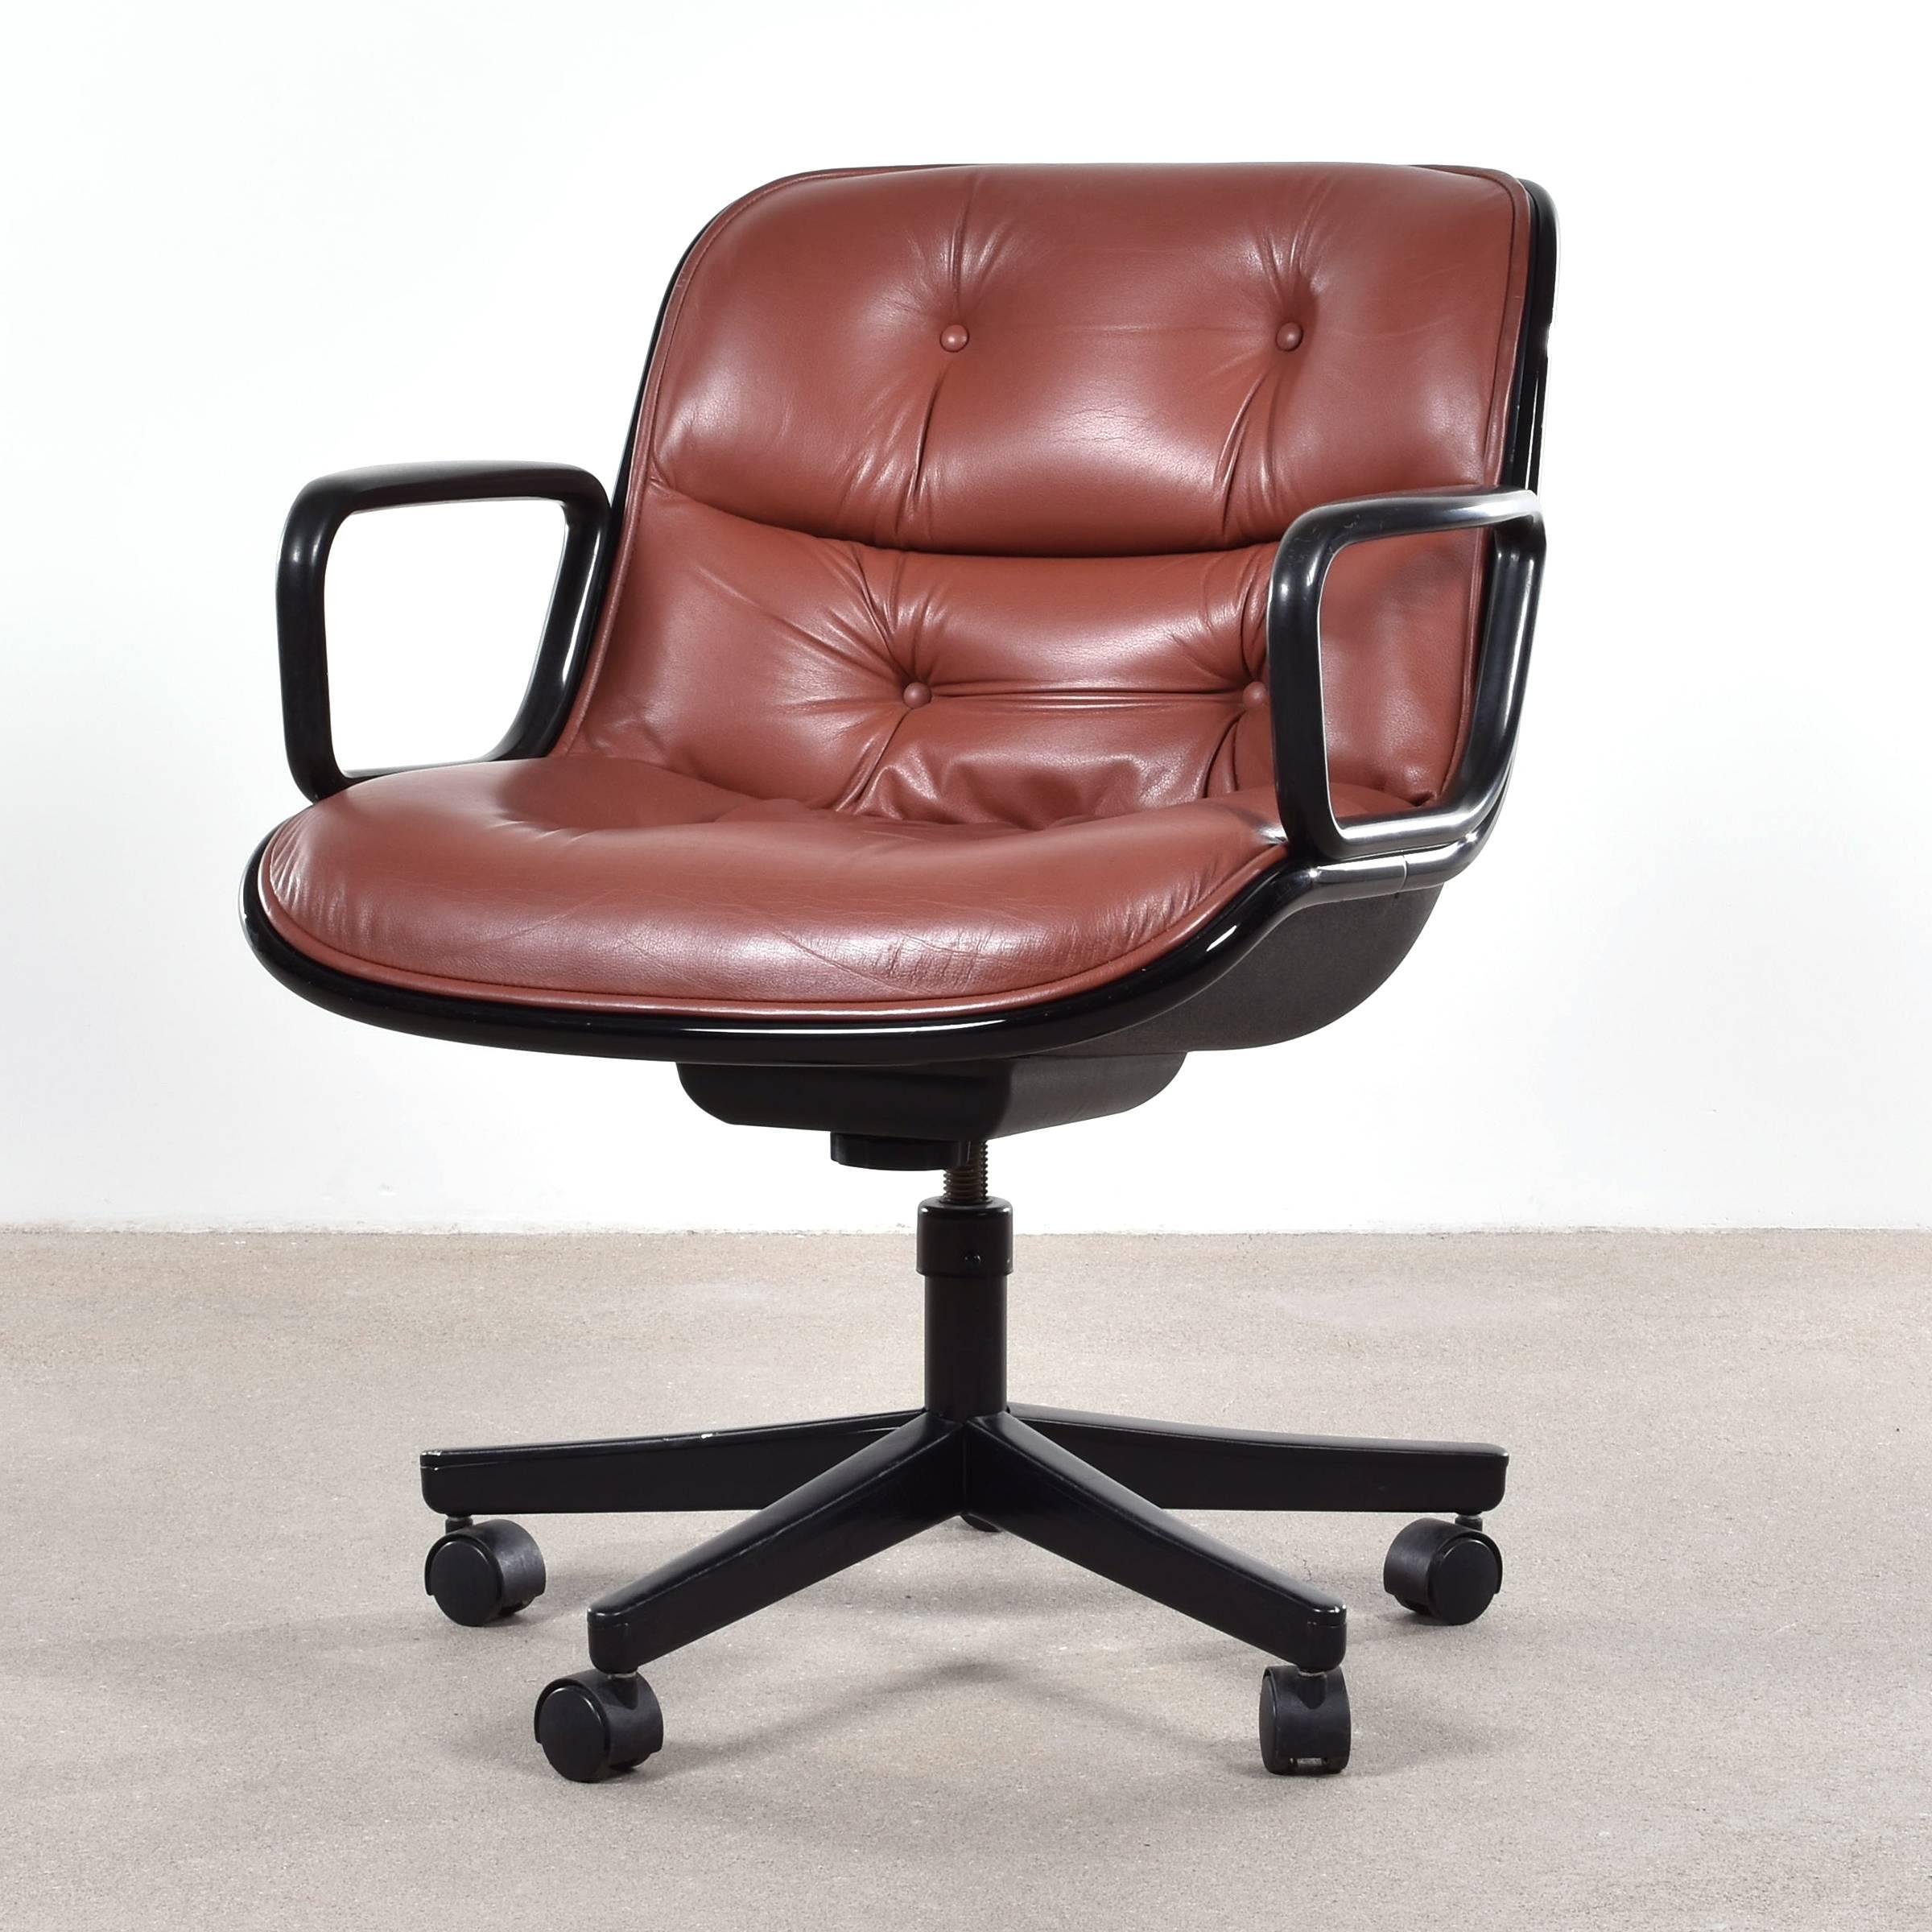 Iconic Pollock executive swivel armchairs on casters. Tilt-swivel mechanism and spindle seat-height adjustment. Original leather in very good condition. The chairs are signed with manufacturer's label.

Free shipping for European